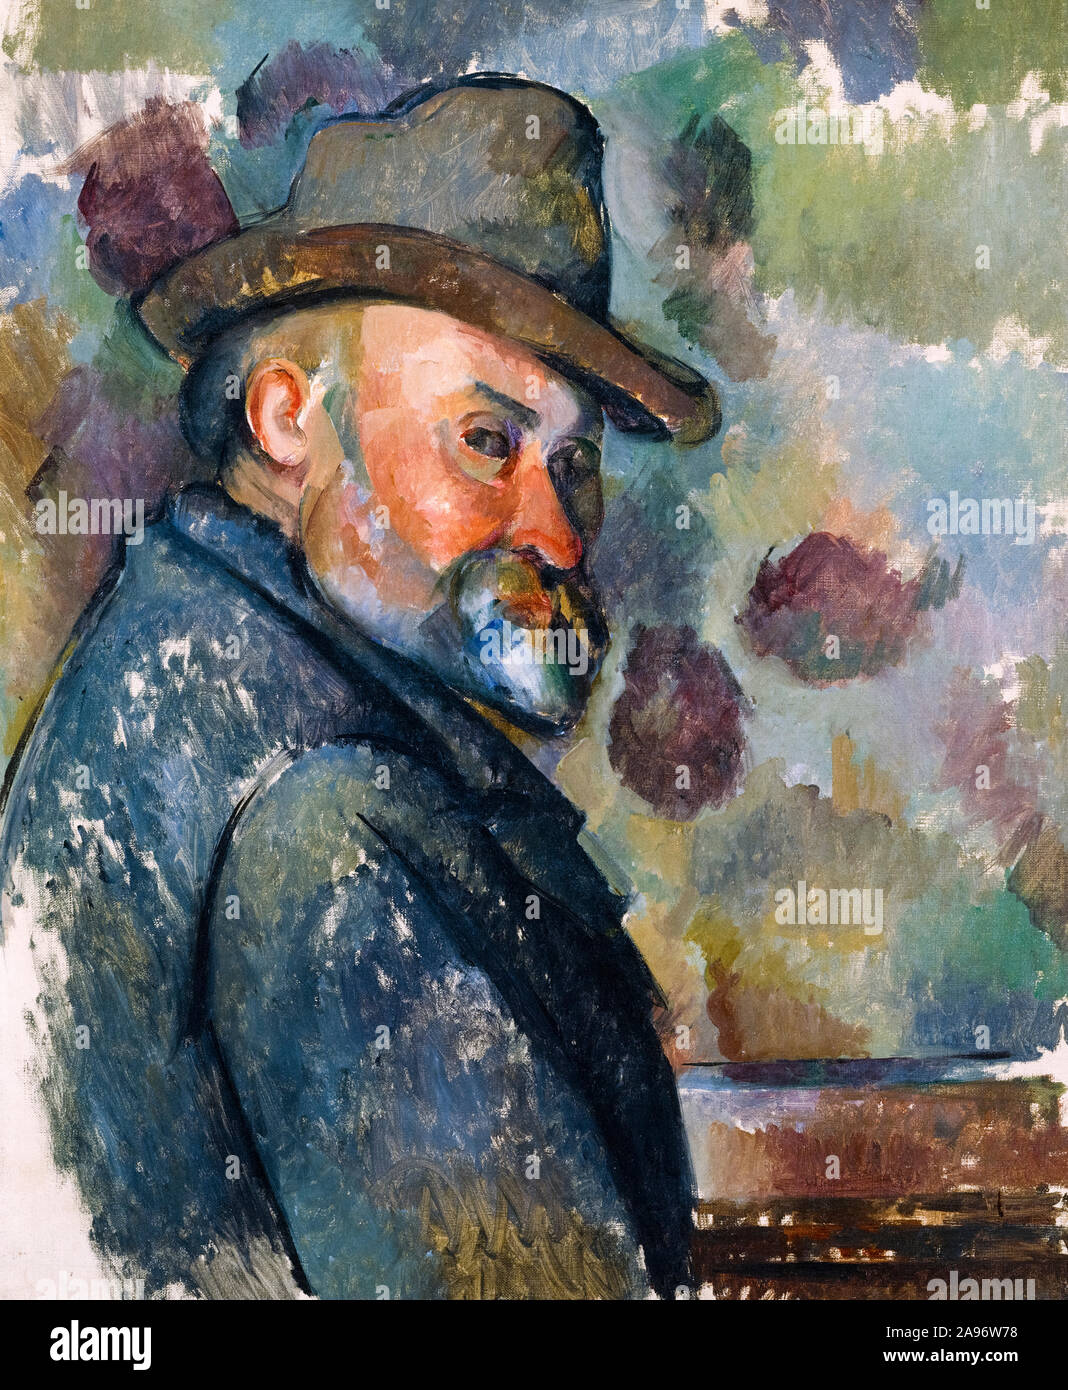 Paul Cezanne, Self portrait in a Soft Hat, painting, 1894 Stock Photo